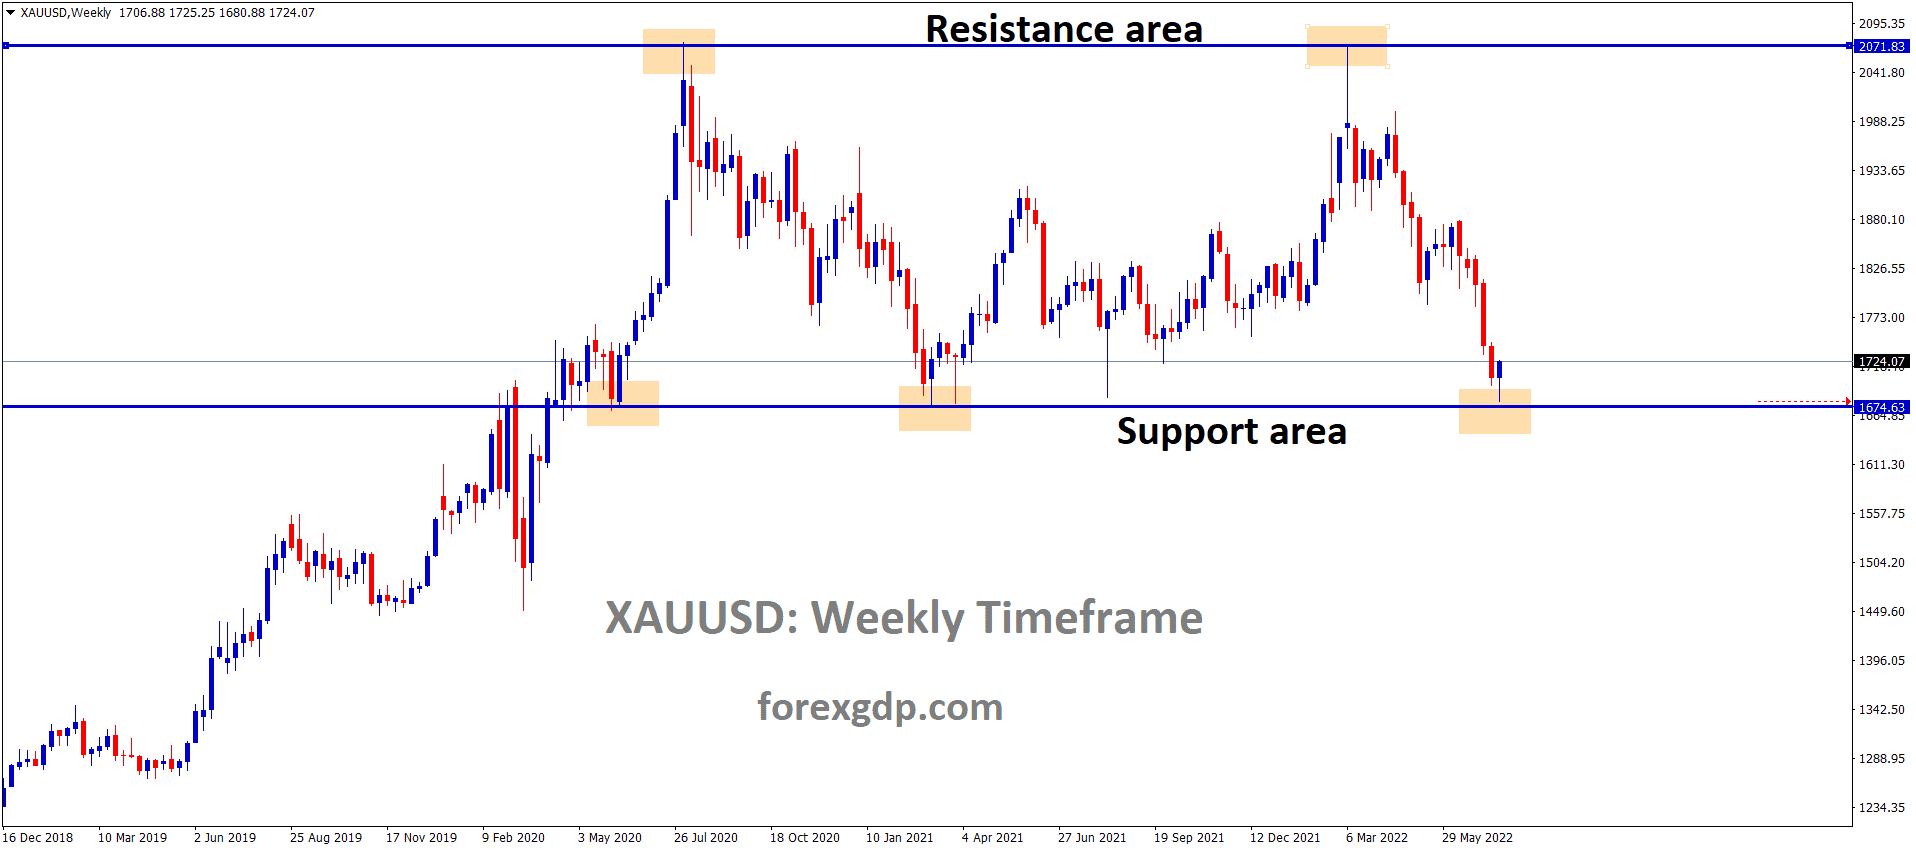 XAUUSD Gold price is moving in the Box Pattern and the Market has rebounded from the Horizontal support area of the Pattern.